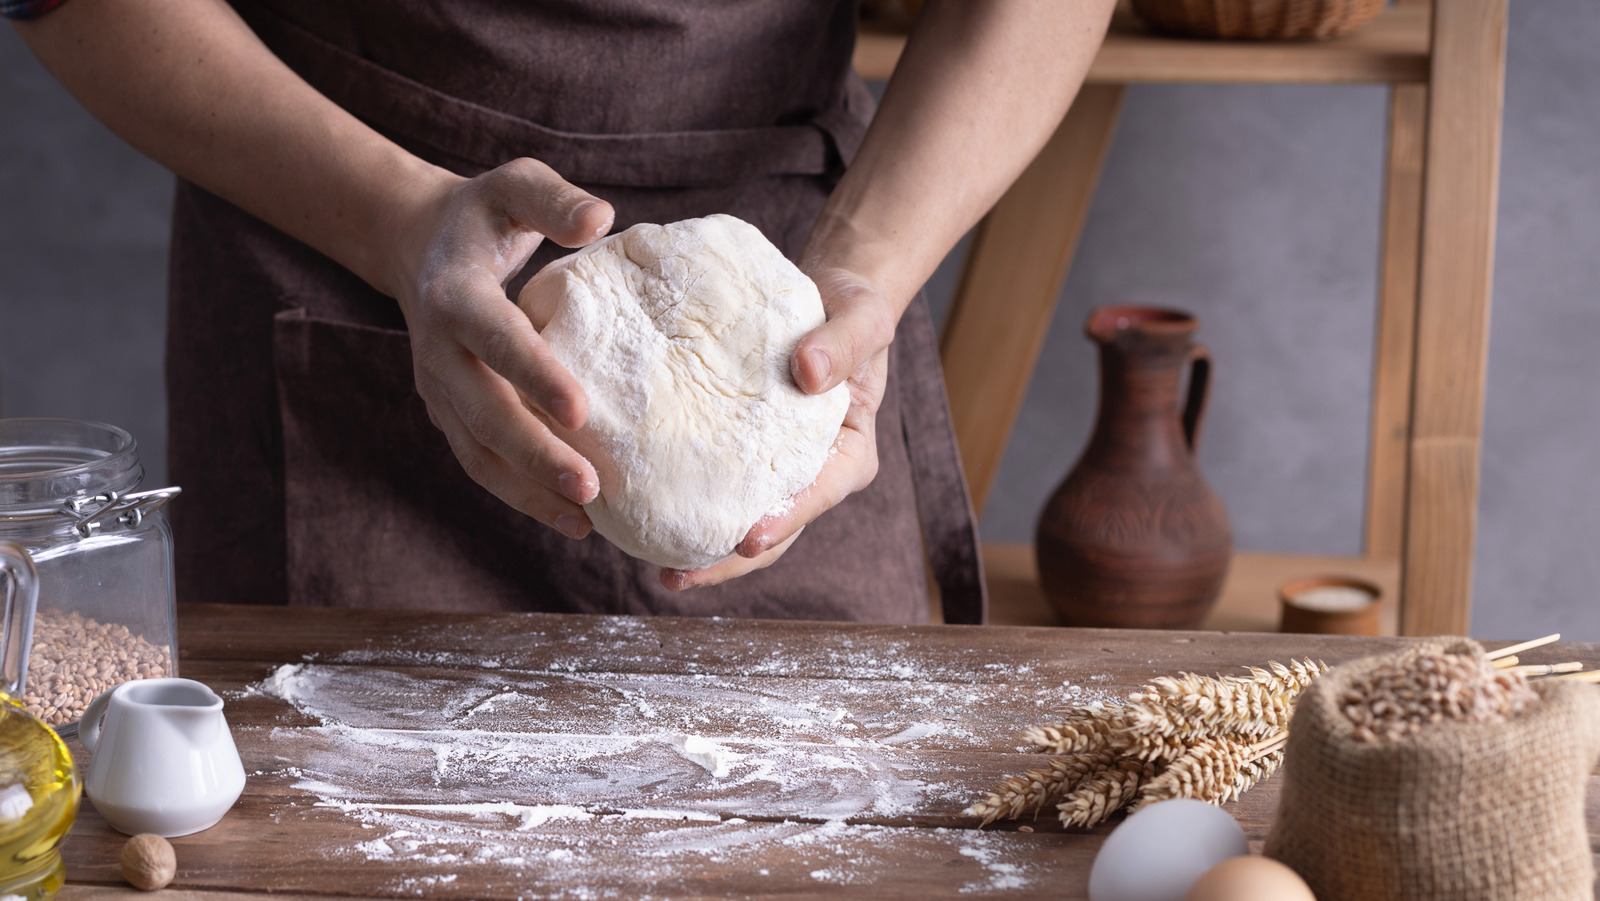 https://www.thedailymeal.com/img/gallery/signs-to-know-your-bread-is-kneaded/l-intro-1669662051.jpg